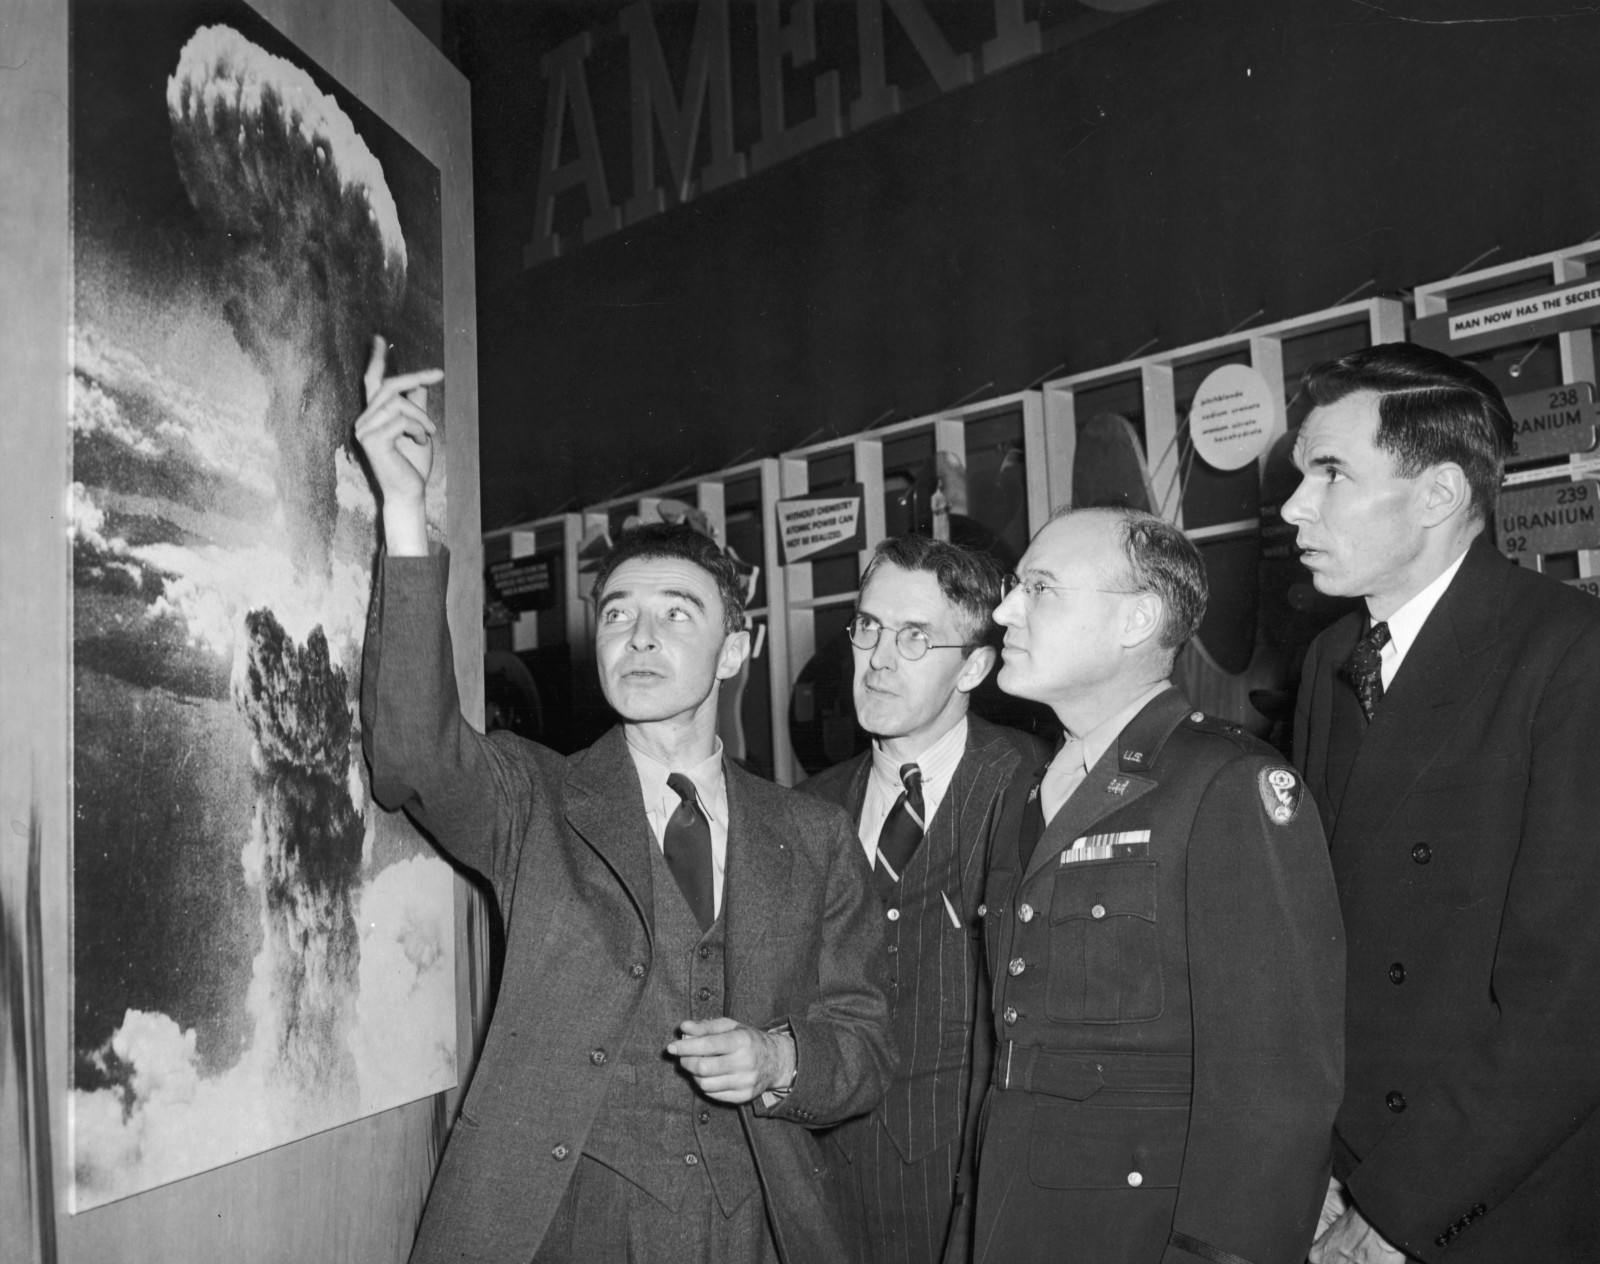 American physicist Dr. Robert Oppenheimer (1904 - 1967), points to a picture of the atomic bomb explosion over Nagasaki, Japan as scientist Henry D. Smyth (1898 - 1986) (second left), major General Kenneth D. Nichols (1907 - 2000) (second right), and scientist Glenn Seaborg (1912 - 1999) look on, 1940s (Hulton Archive/Getty Images)